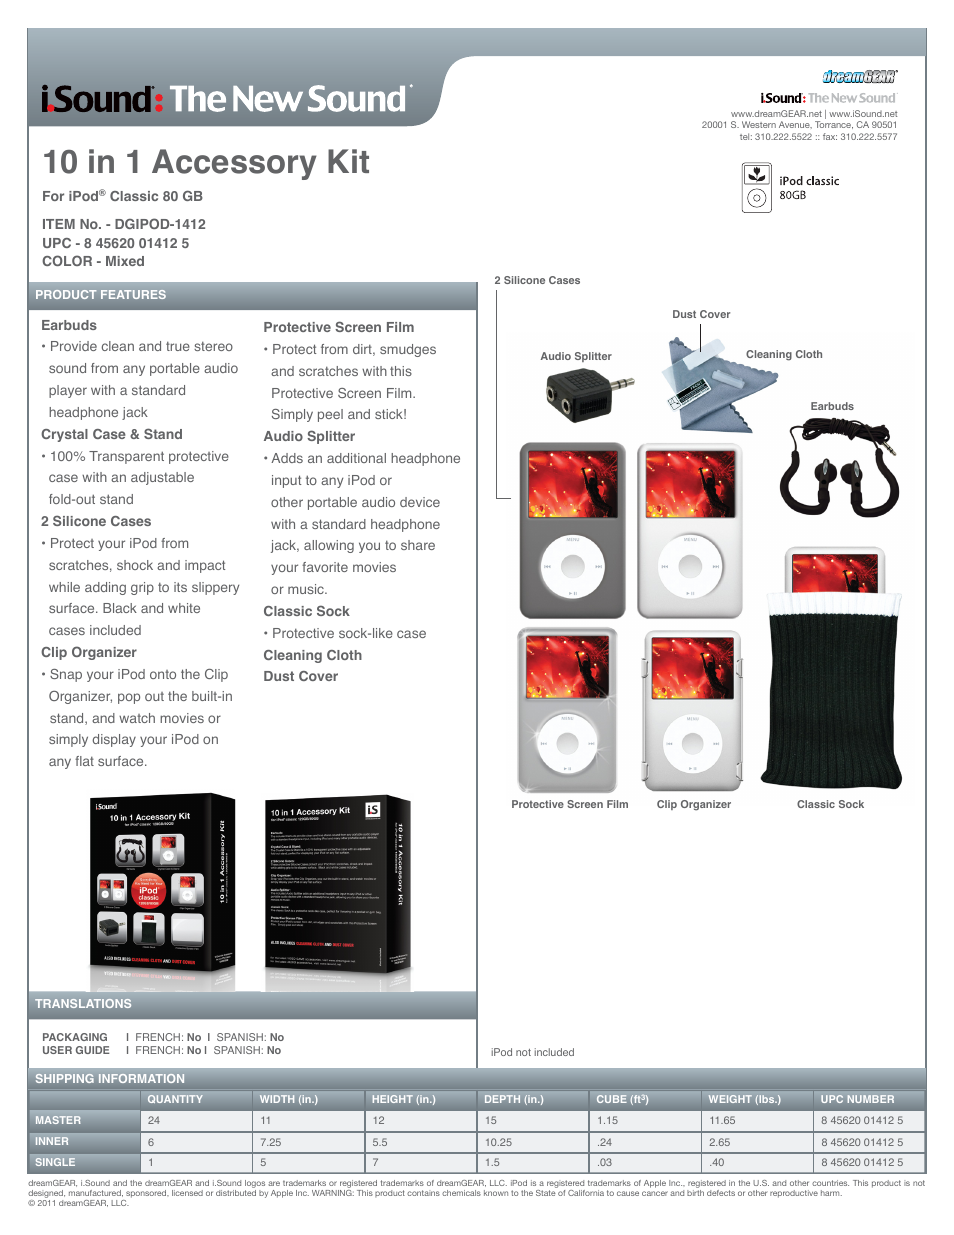 10 In 1 Accessory Kit For iPod Classic 120Gb_80Gb - Sell Sheet